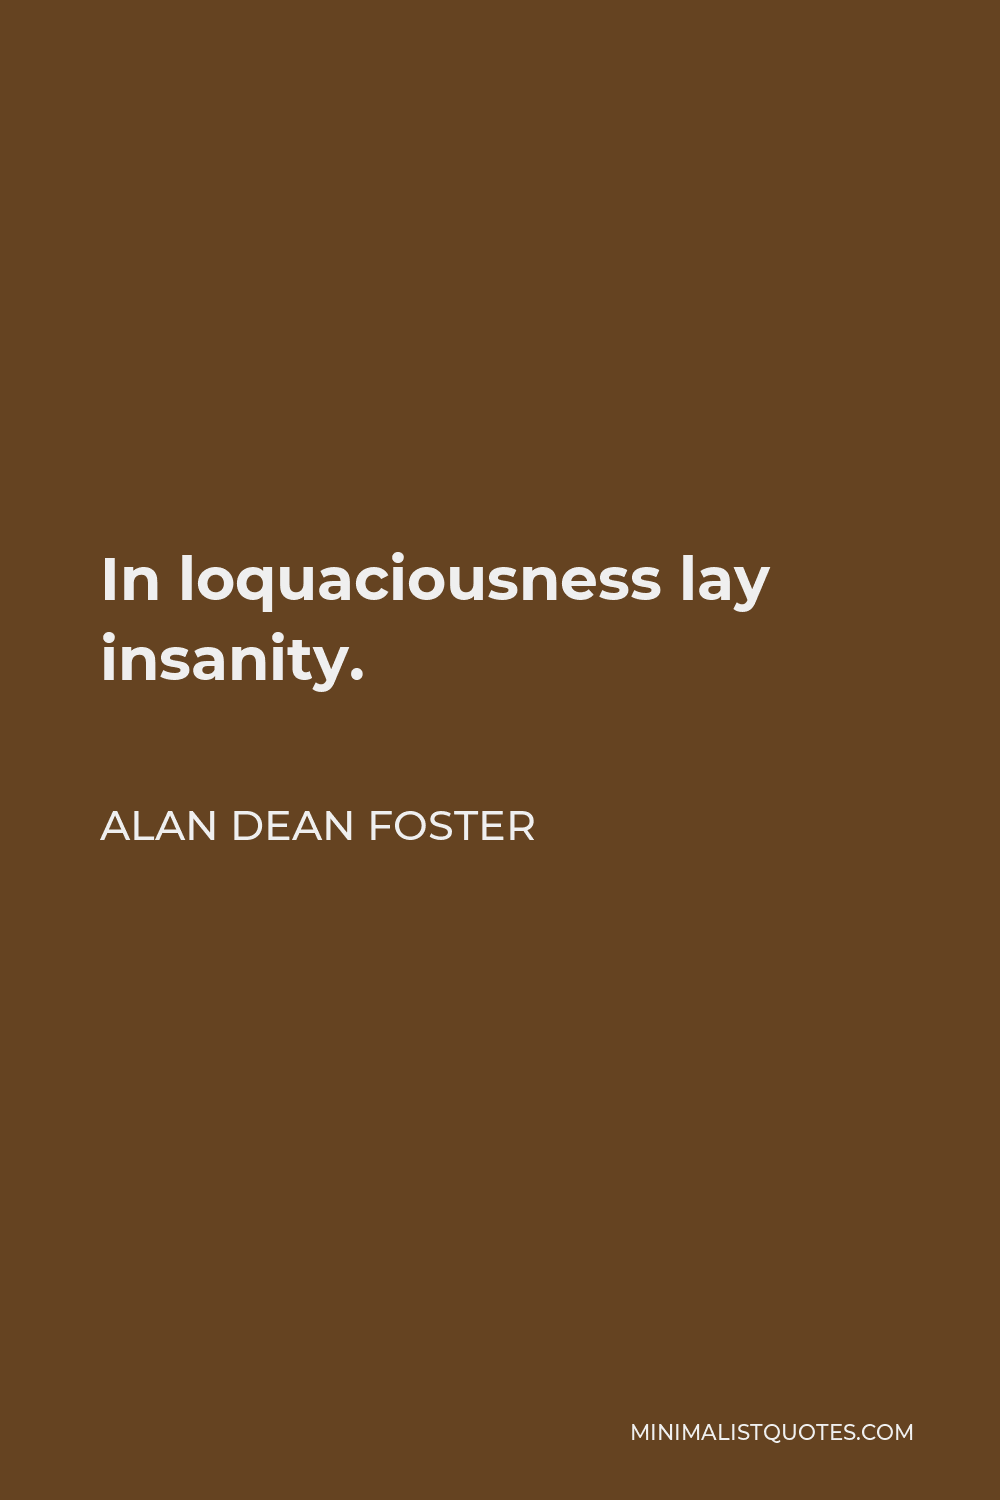 Alan Dean Foster Quote - In loquaciousness lay insanity.